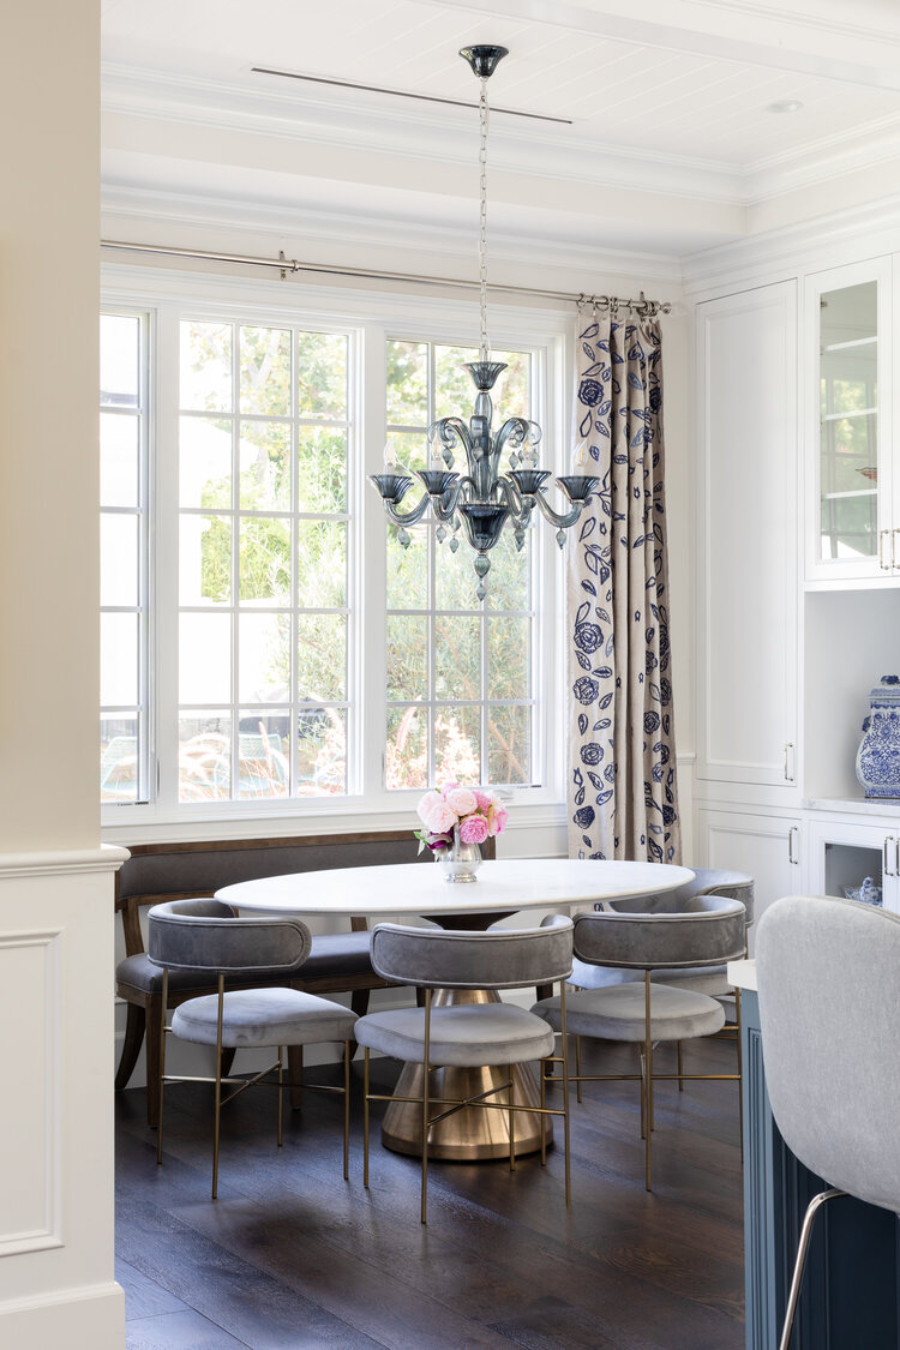 Dining Room Trends: Sophisticated and Timeless, Modern and Comfortable dining room trends Dining Room Trends: Sophisticated and Timeless, Modern and Comfortable Dining Room Trends Sophisticated and Timeless Modern and Comfortable 9